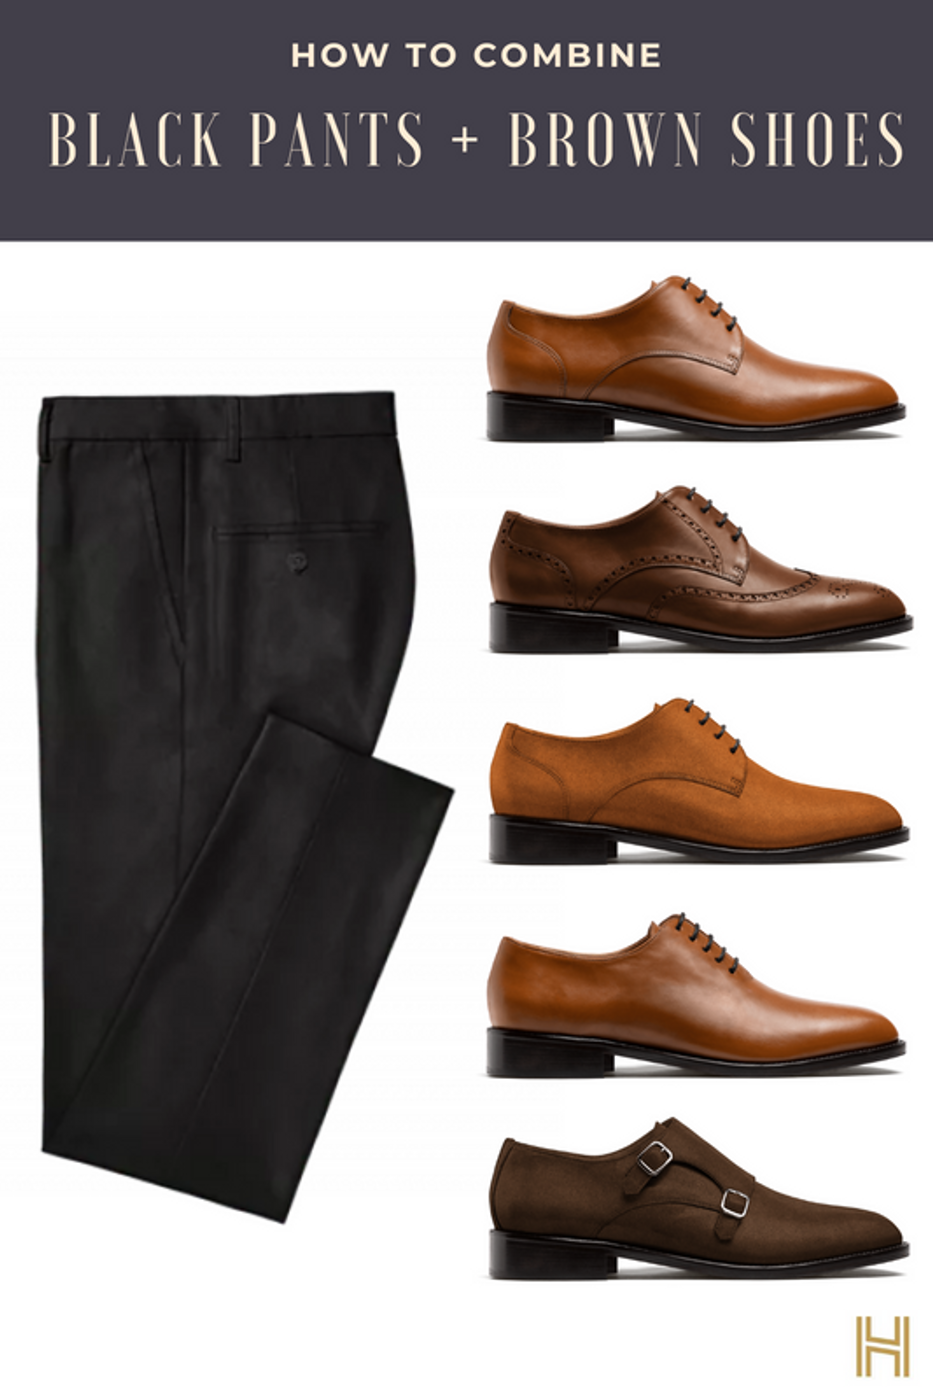 Share more than 185 black suit shoes combination latest